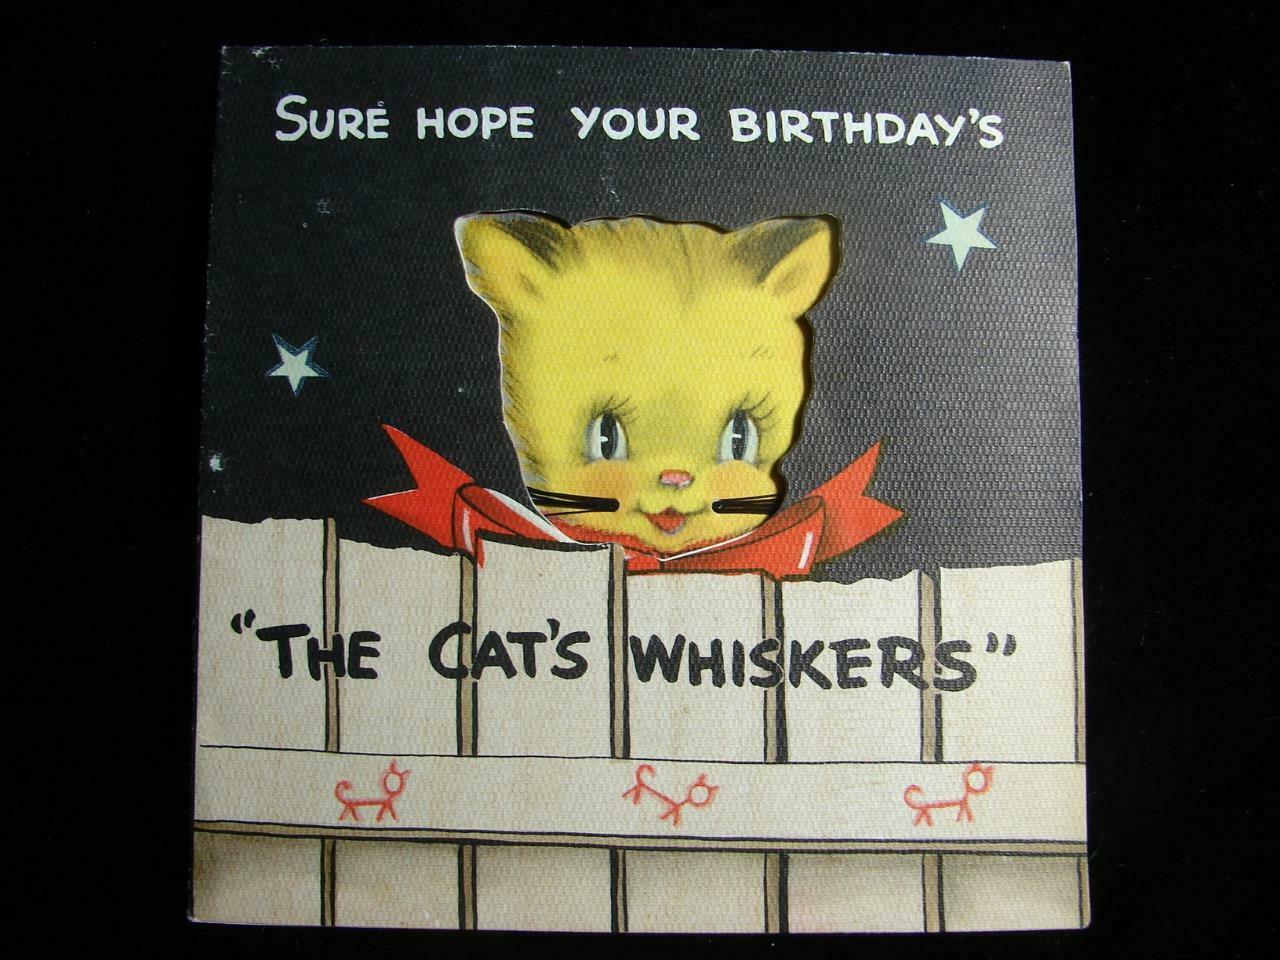 Vintage "the Cat's Whiskers Birthday Wish!!" Birthday Greeting Card